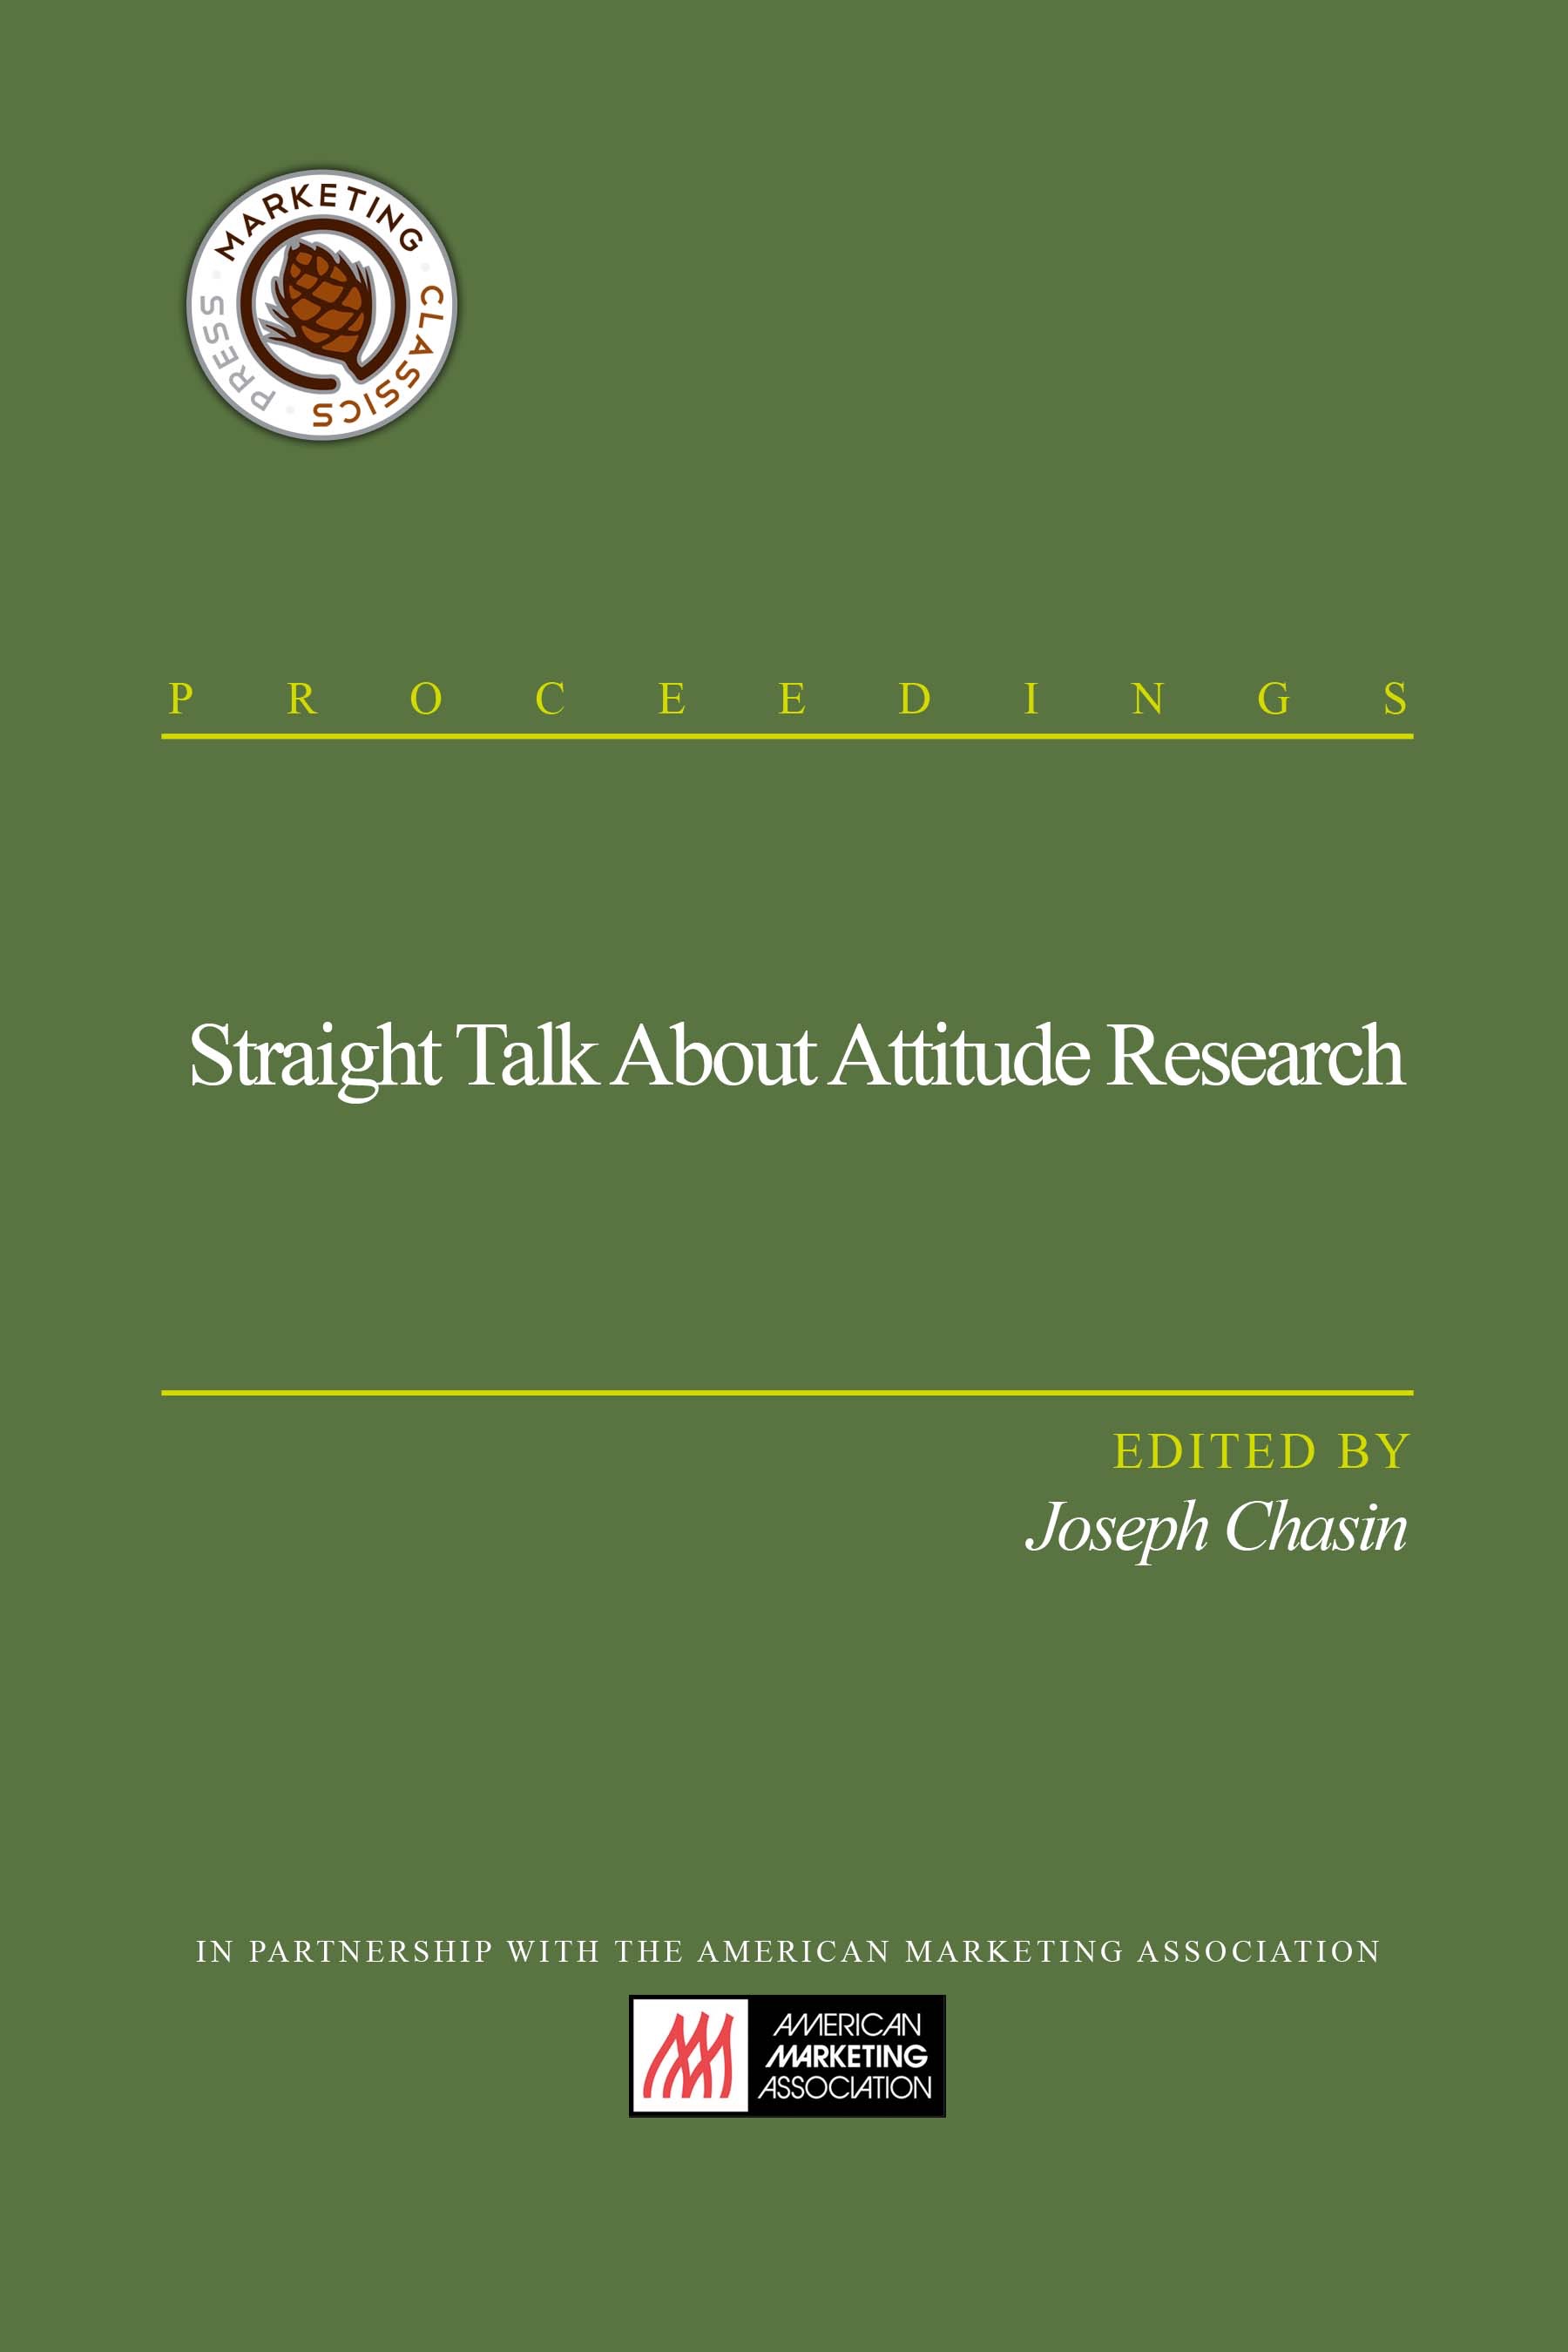 Straight Talk About Attitude Research